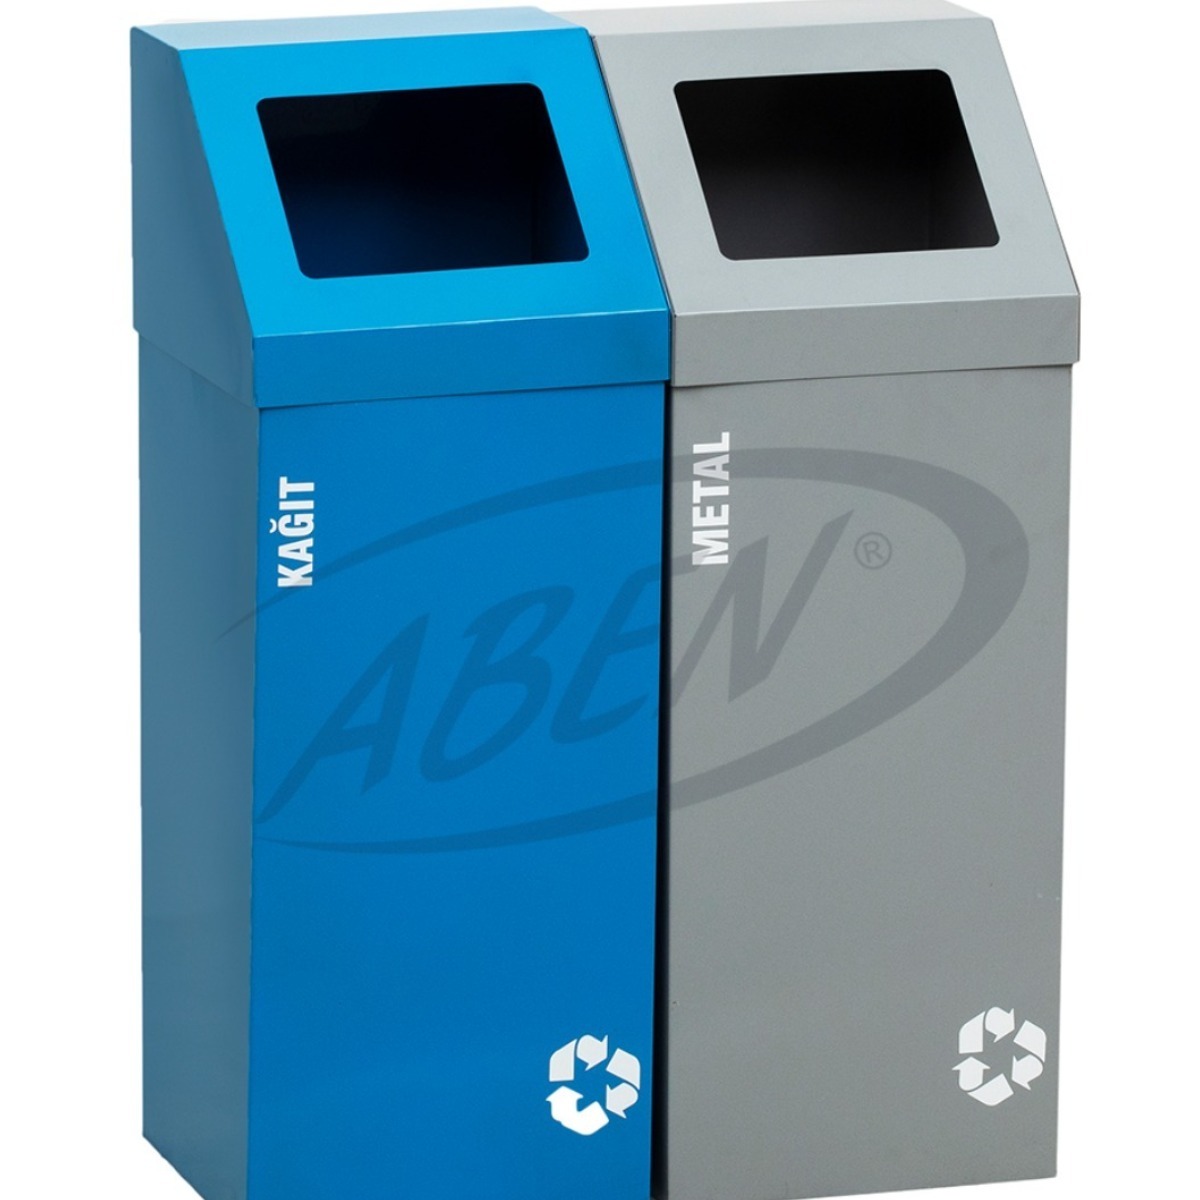 AB-744 2'Part Recycle Bin product logo